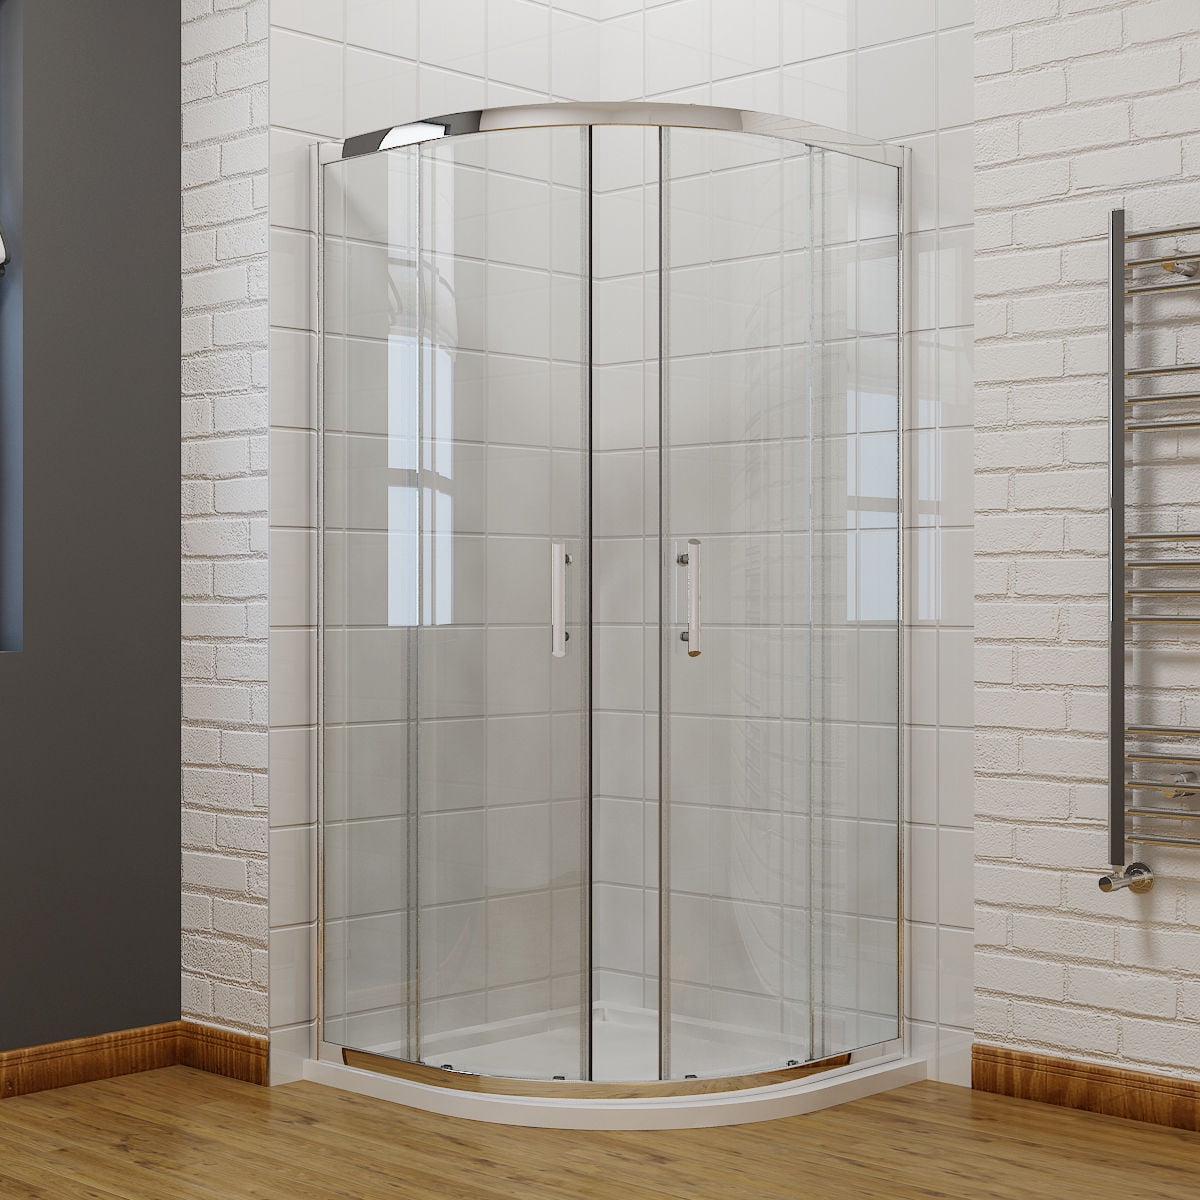 Aica Luxury Walk In Shower Enclosure & Tray Curved Glass Cubicle Screen Panel 